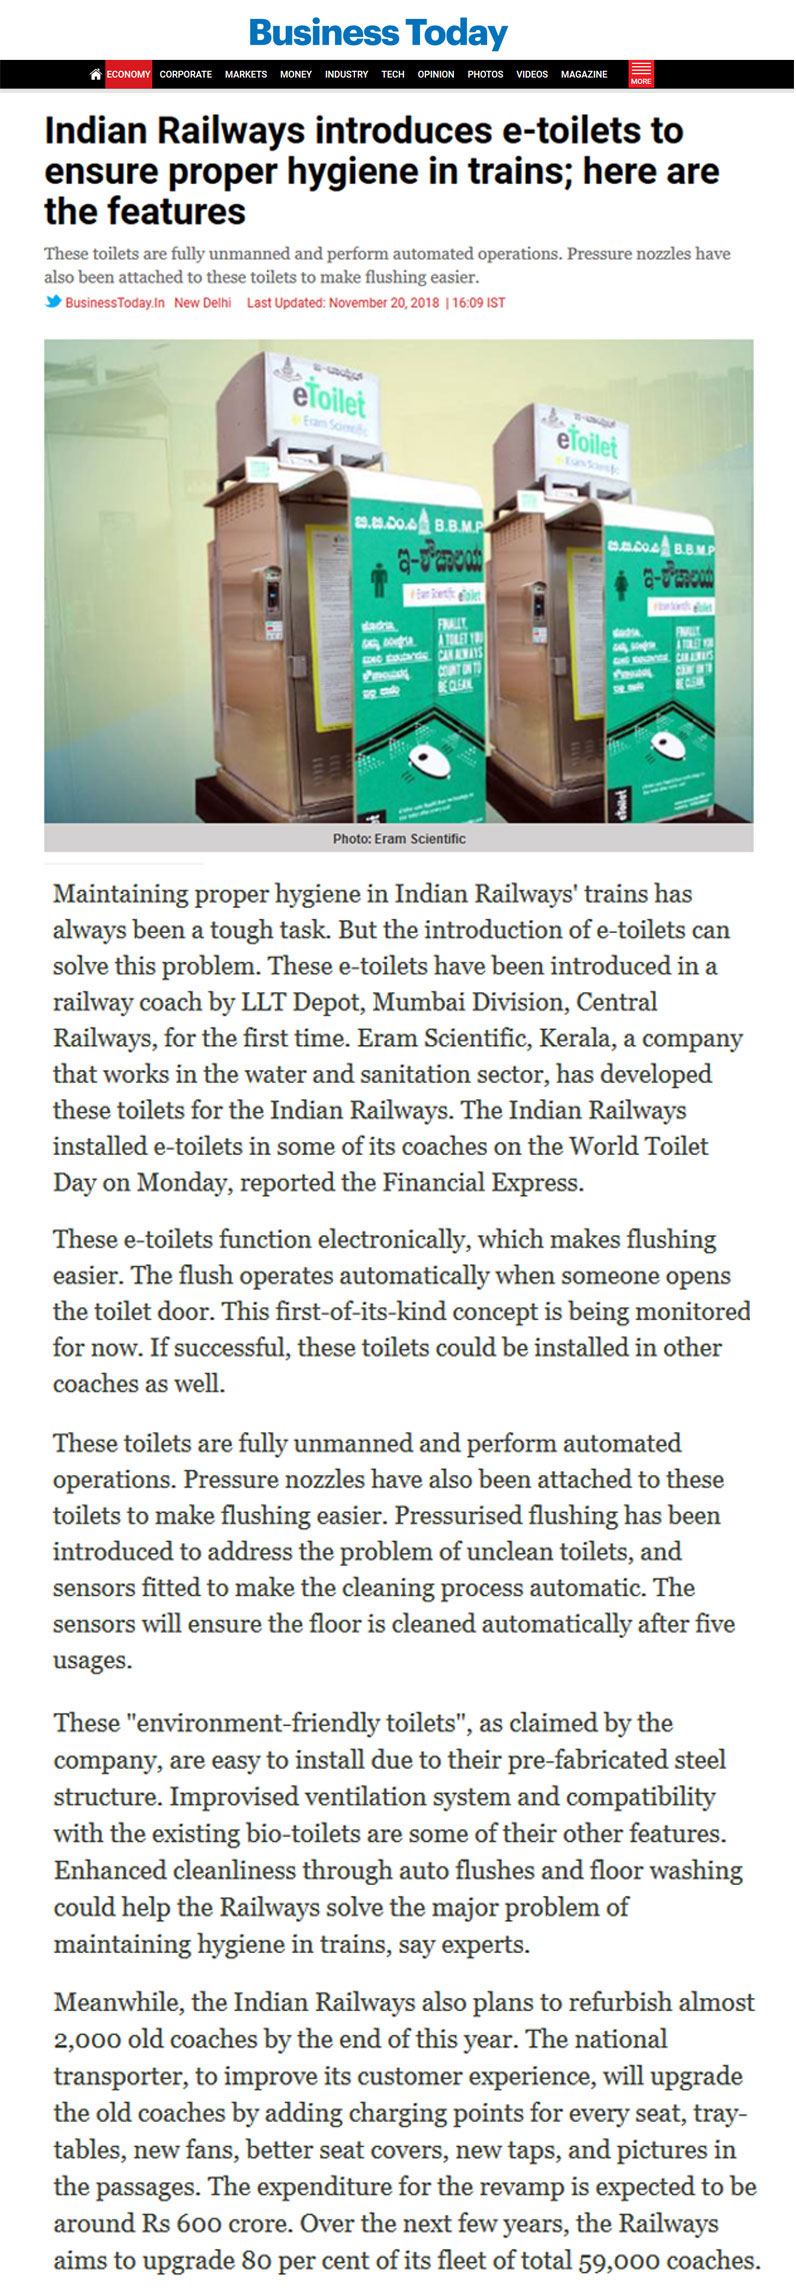 Indian Railways introduces e-toilets to ensure proper hygiene in trains; here are the features